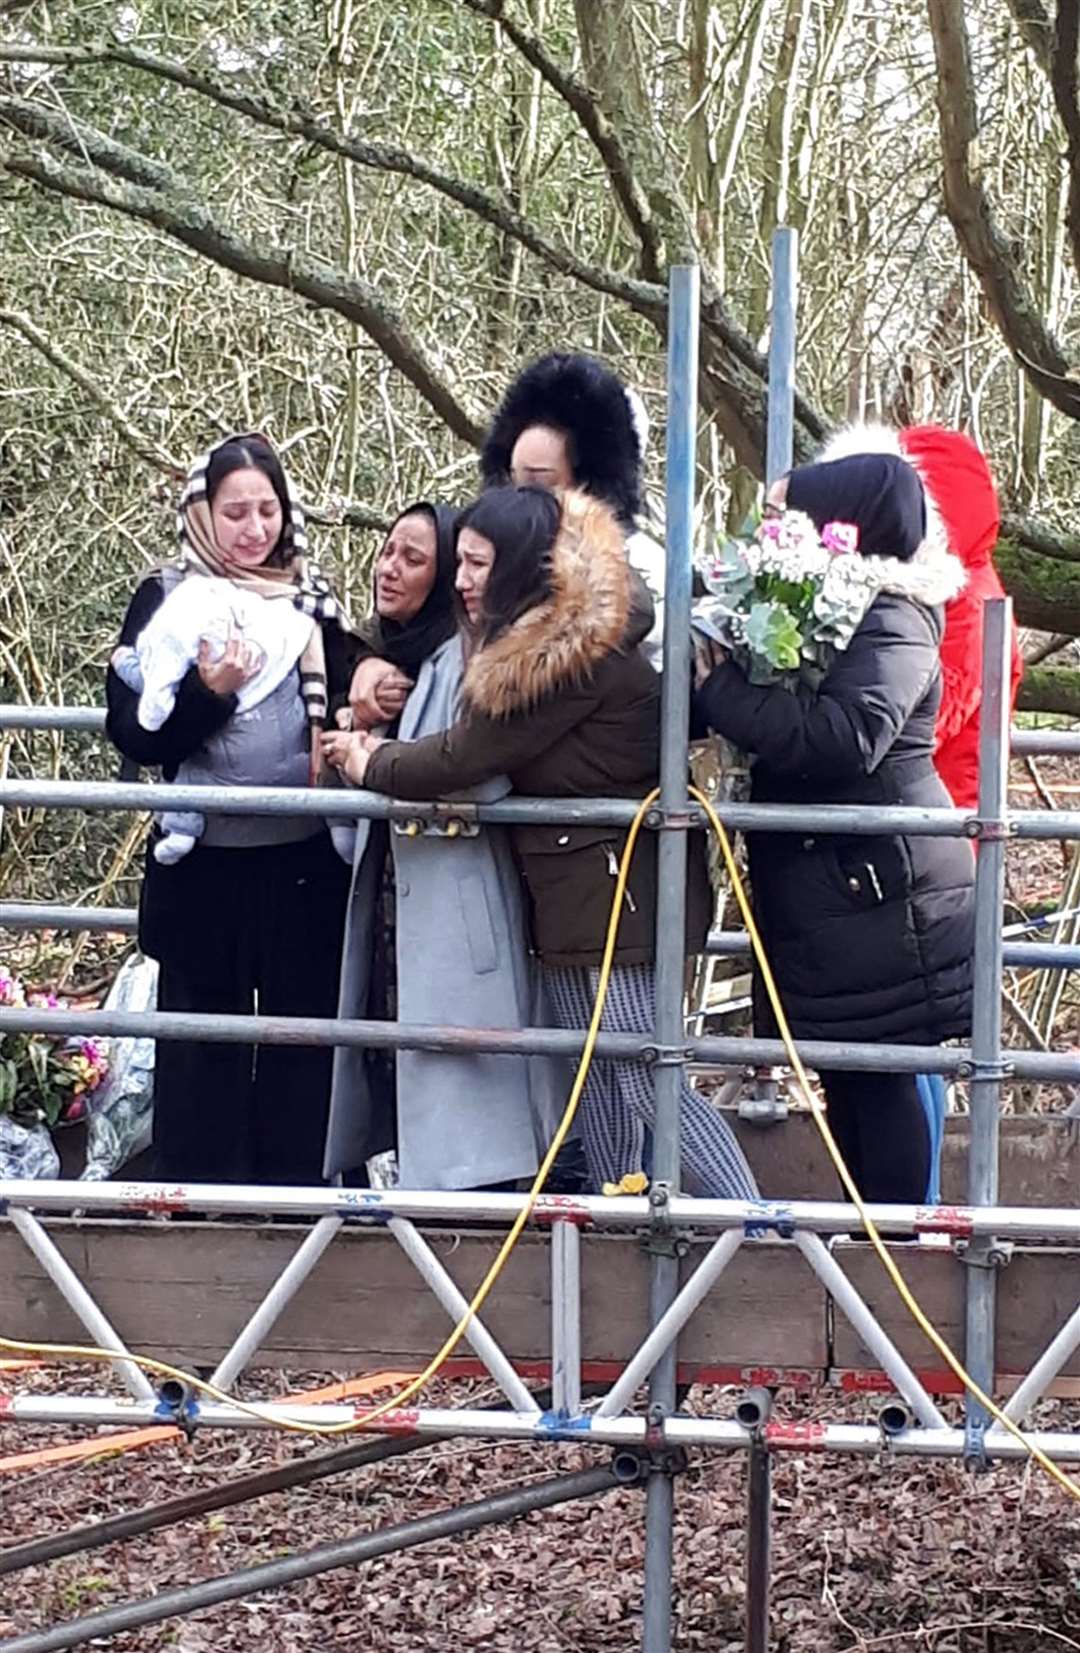 Members of Mohammed Shah Subhani’s family visit the site in Buckinghamshire where his remains were found (Metropolitan Police/PA)